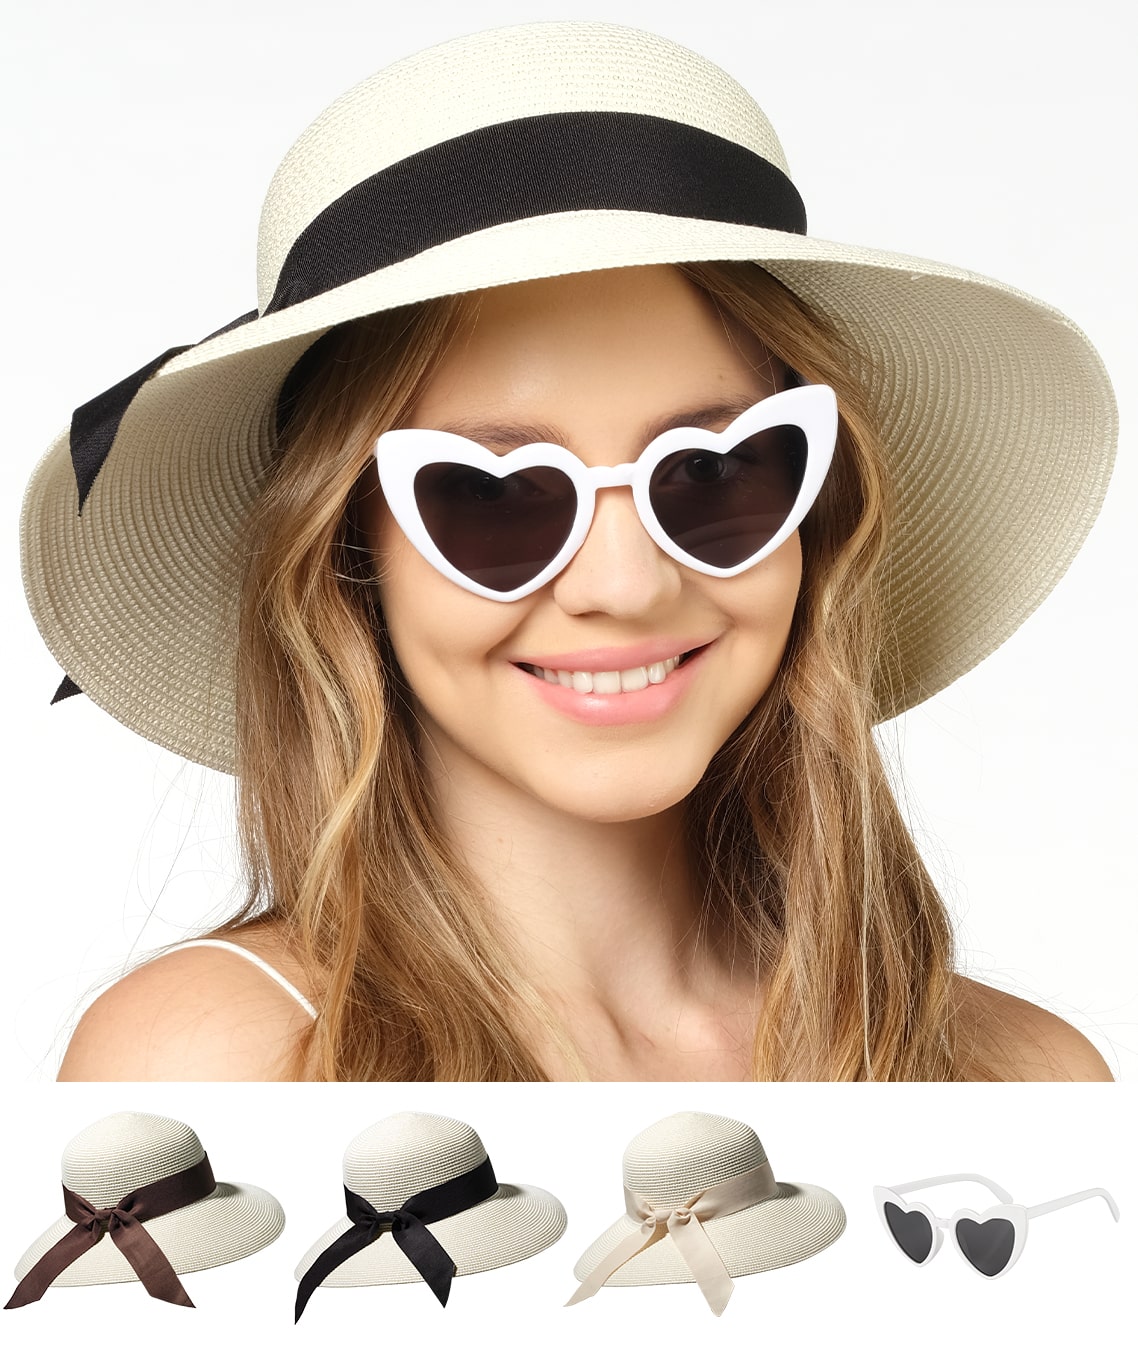 Ivory Panama straw beach hats for women-Packable Sun Hat - Funcredible